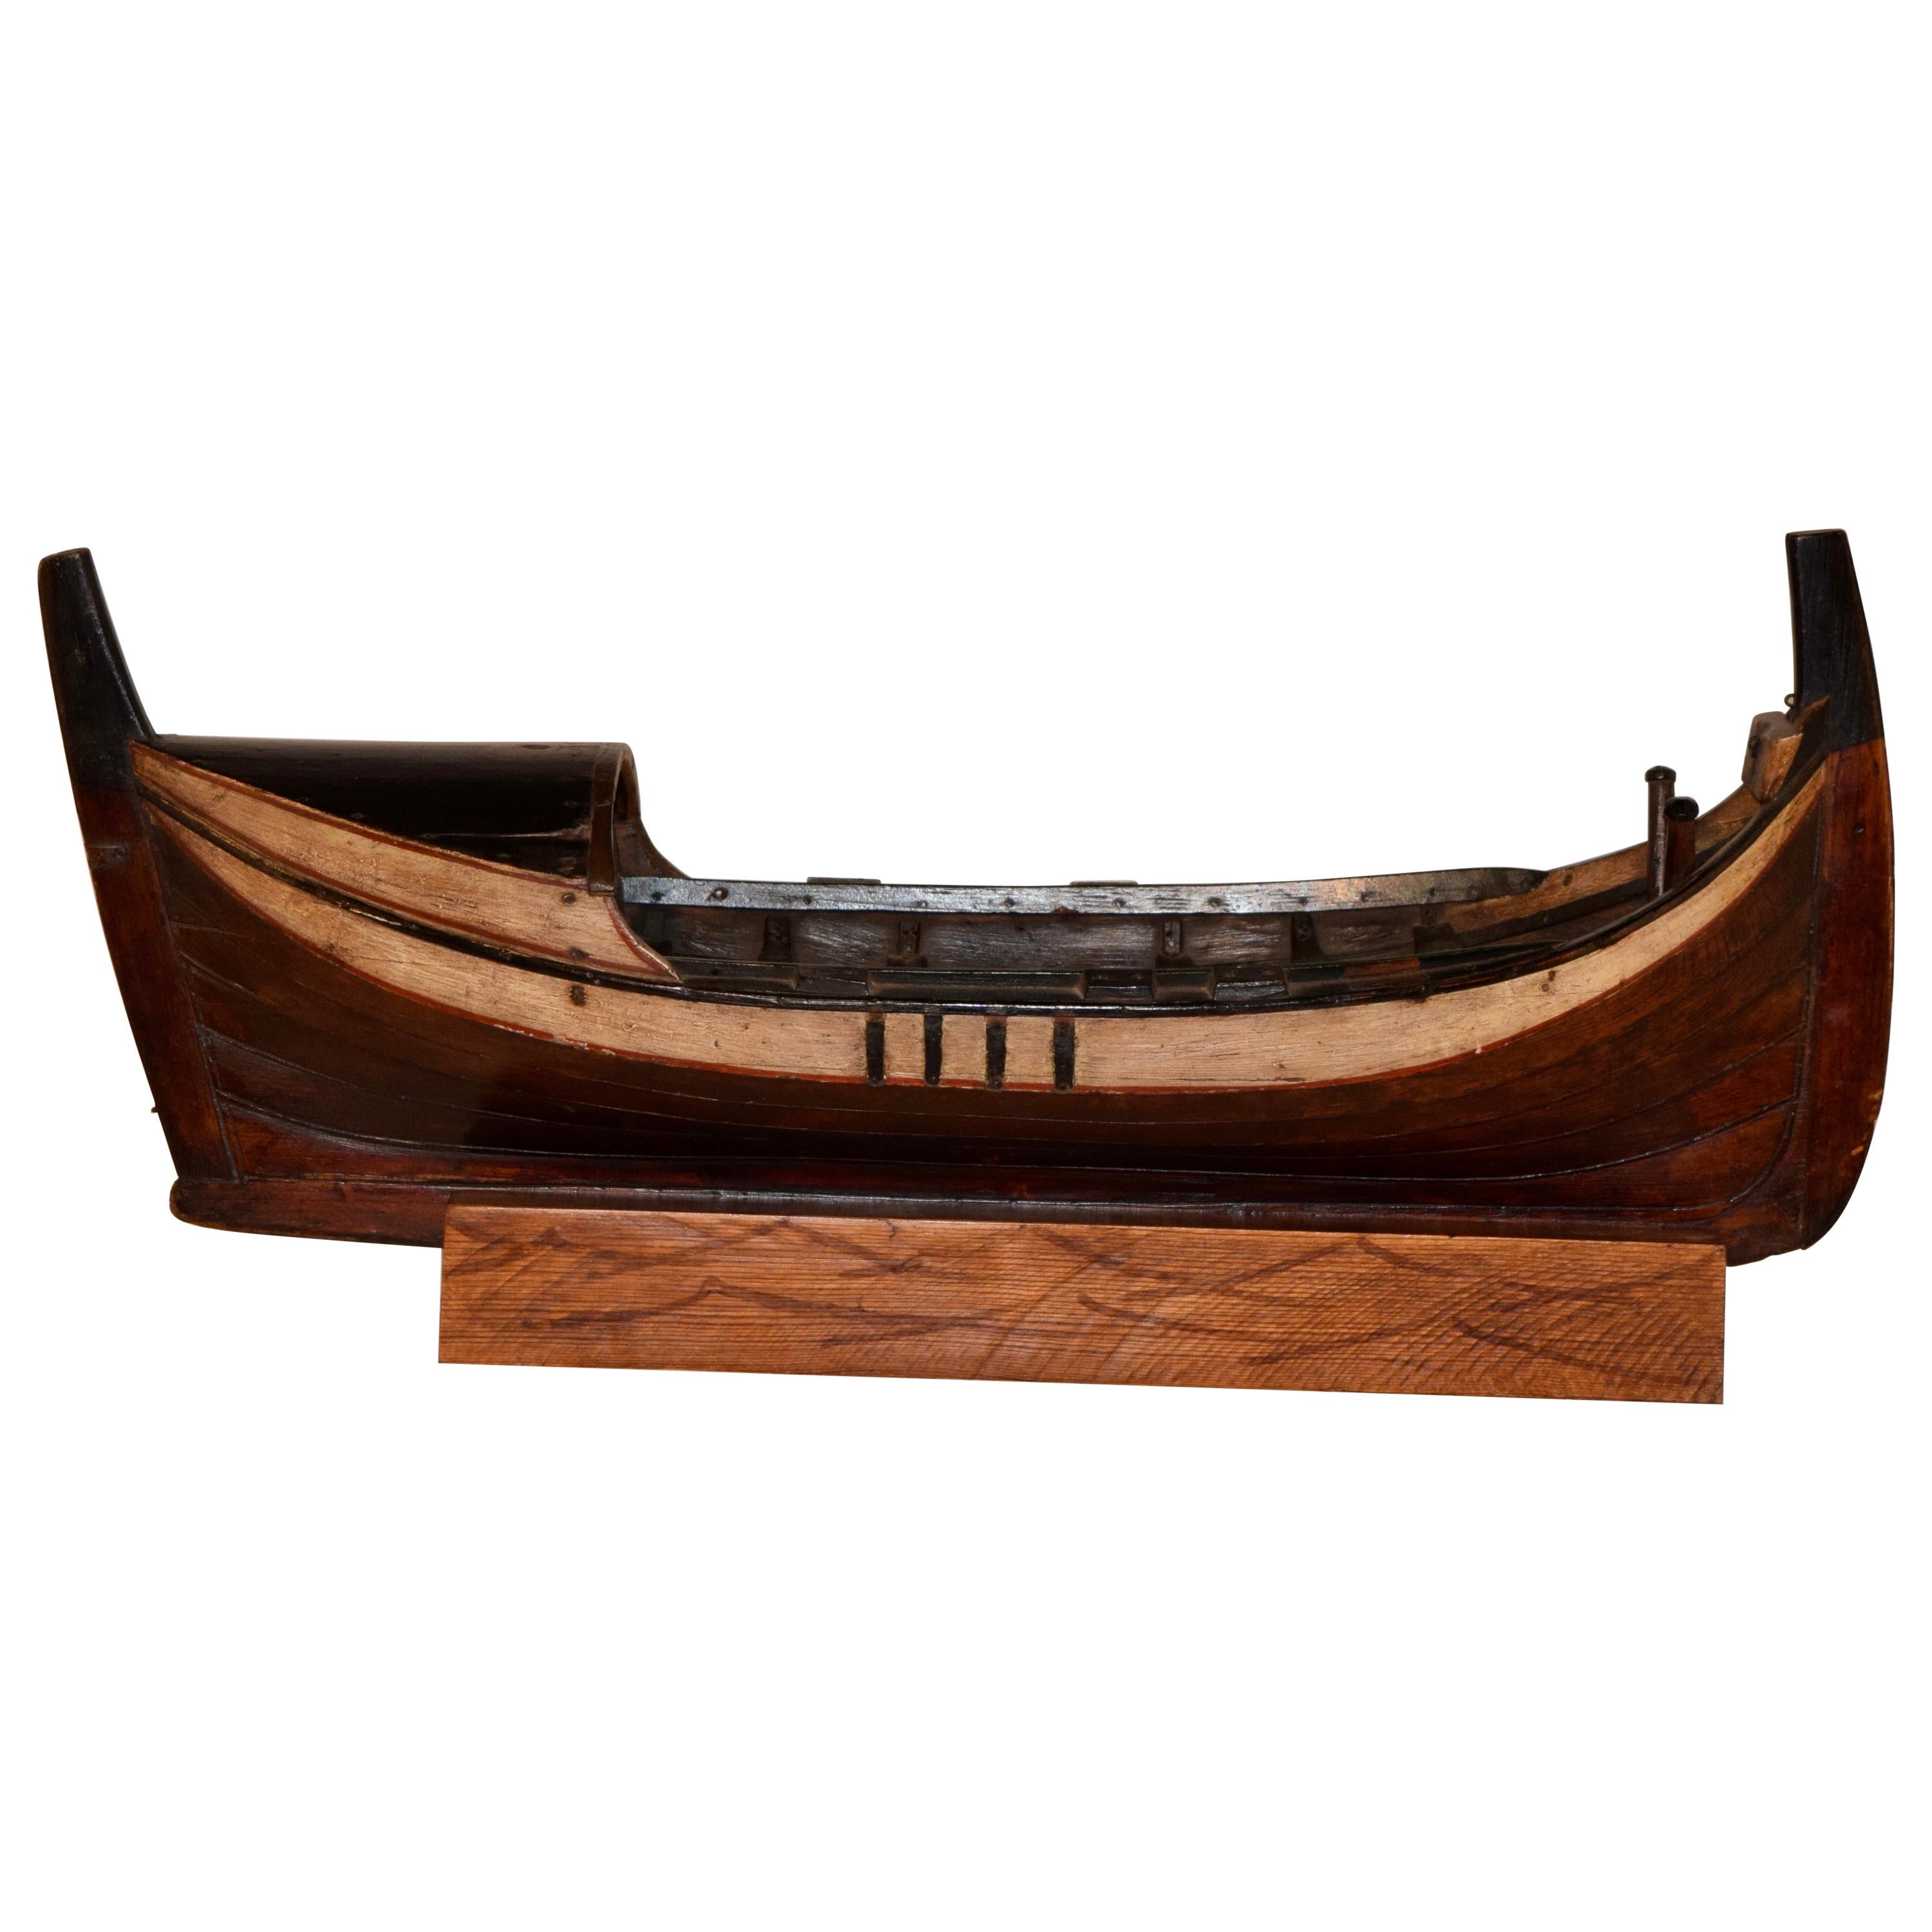 19th Century Model of Boat on Stand